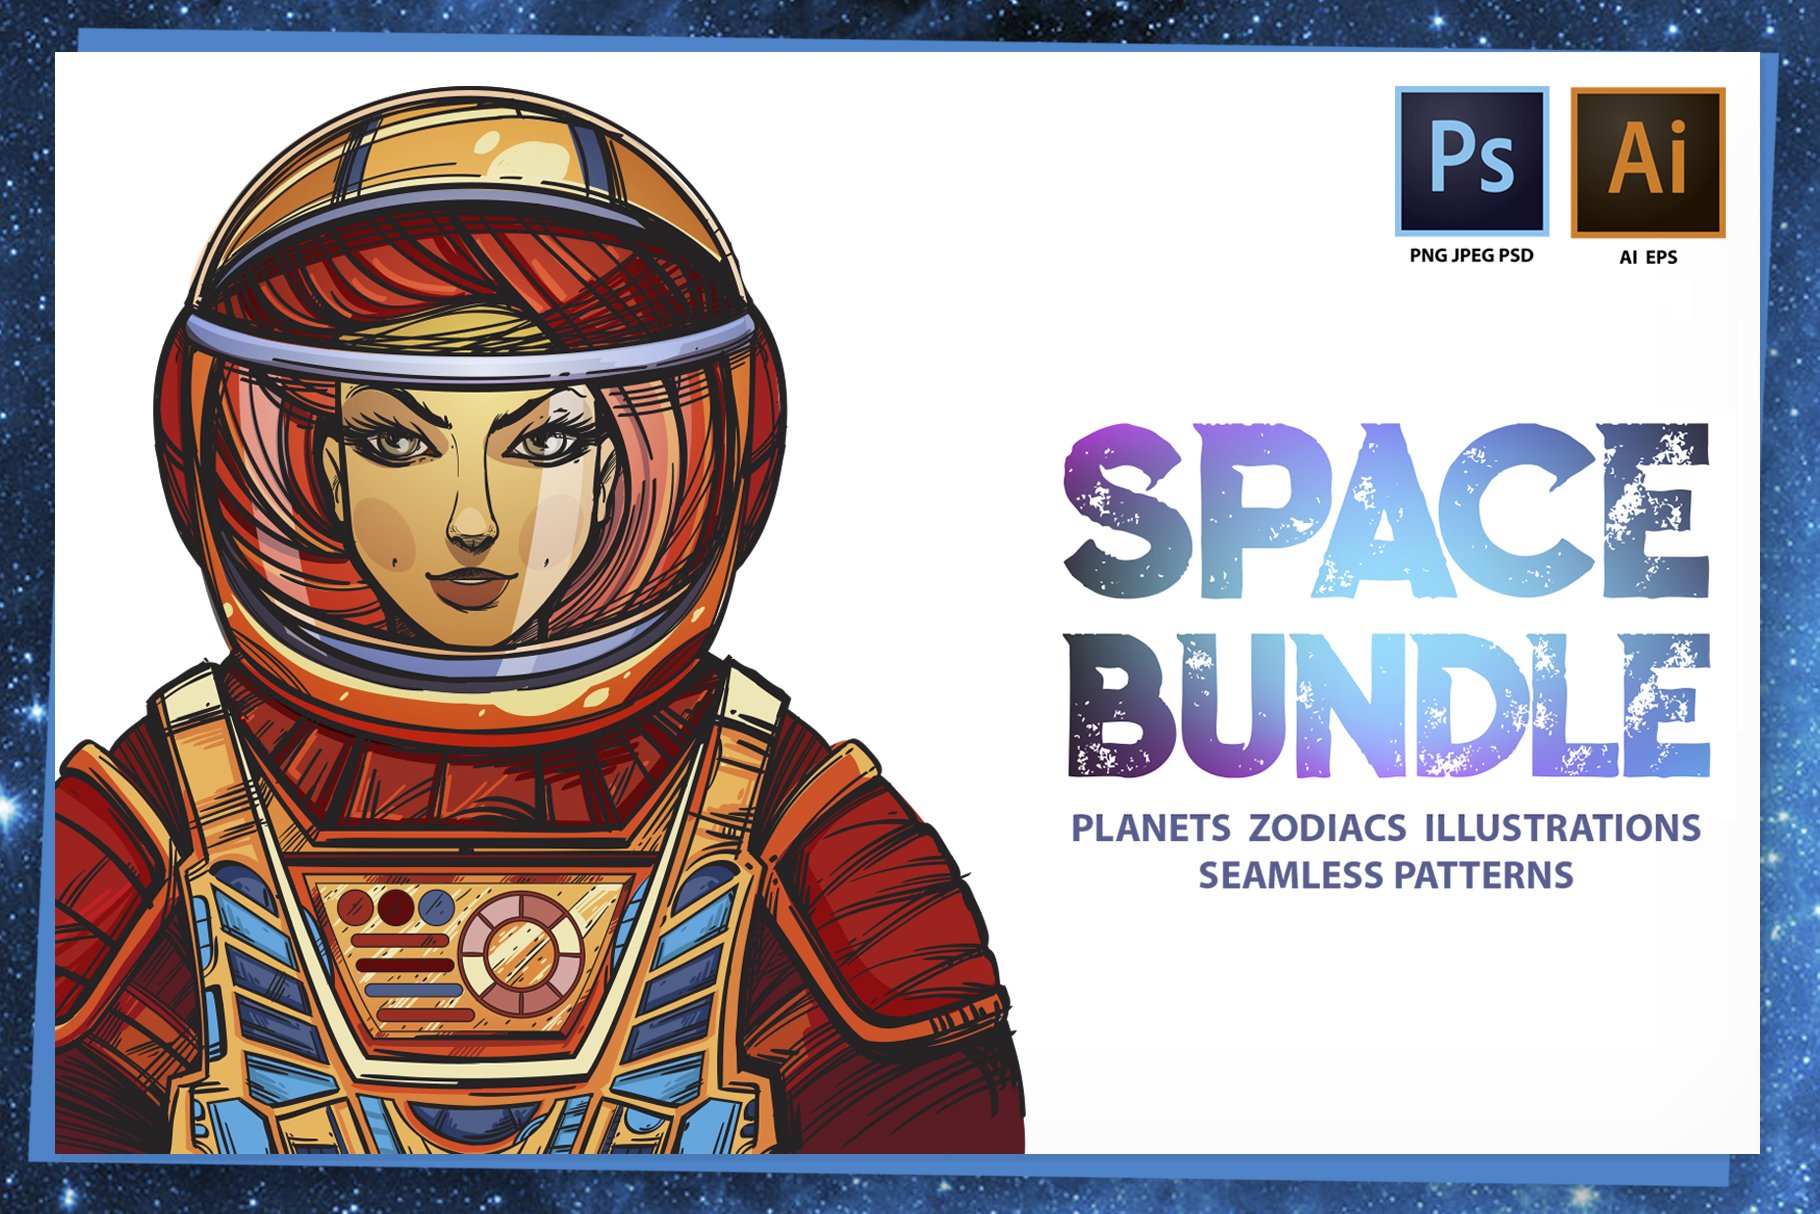 SPACE BUNDLE cover image.